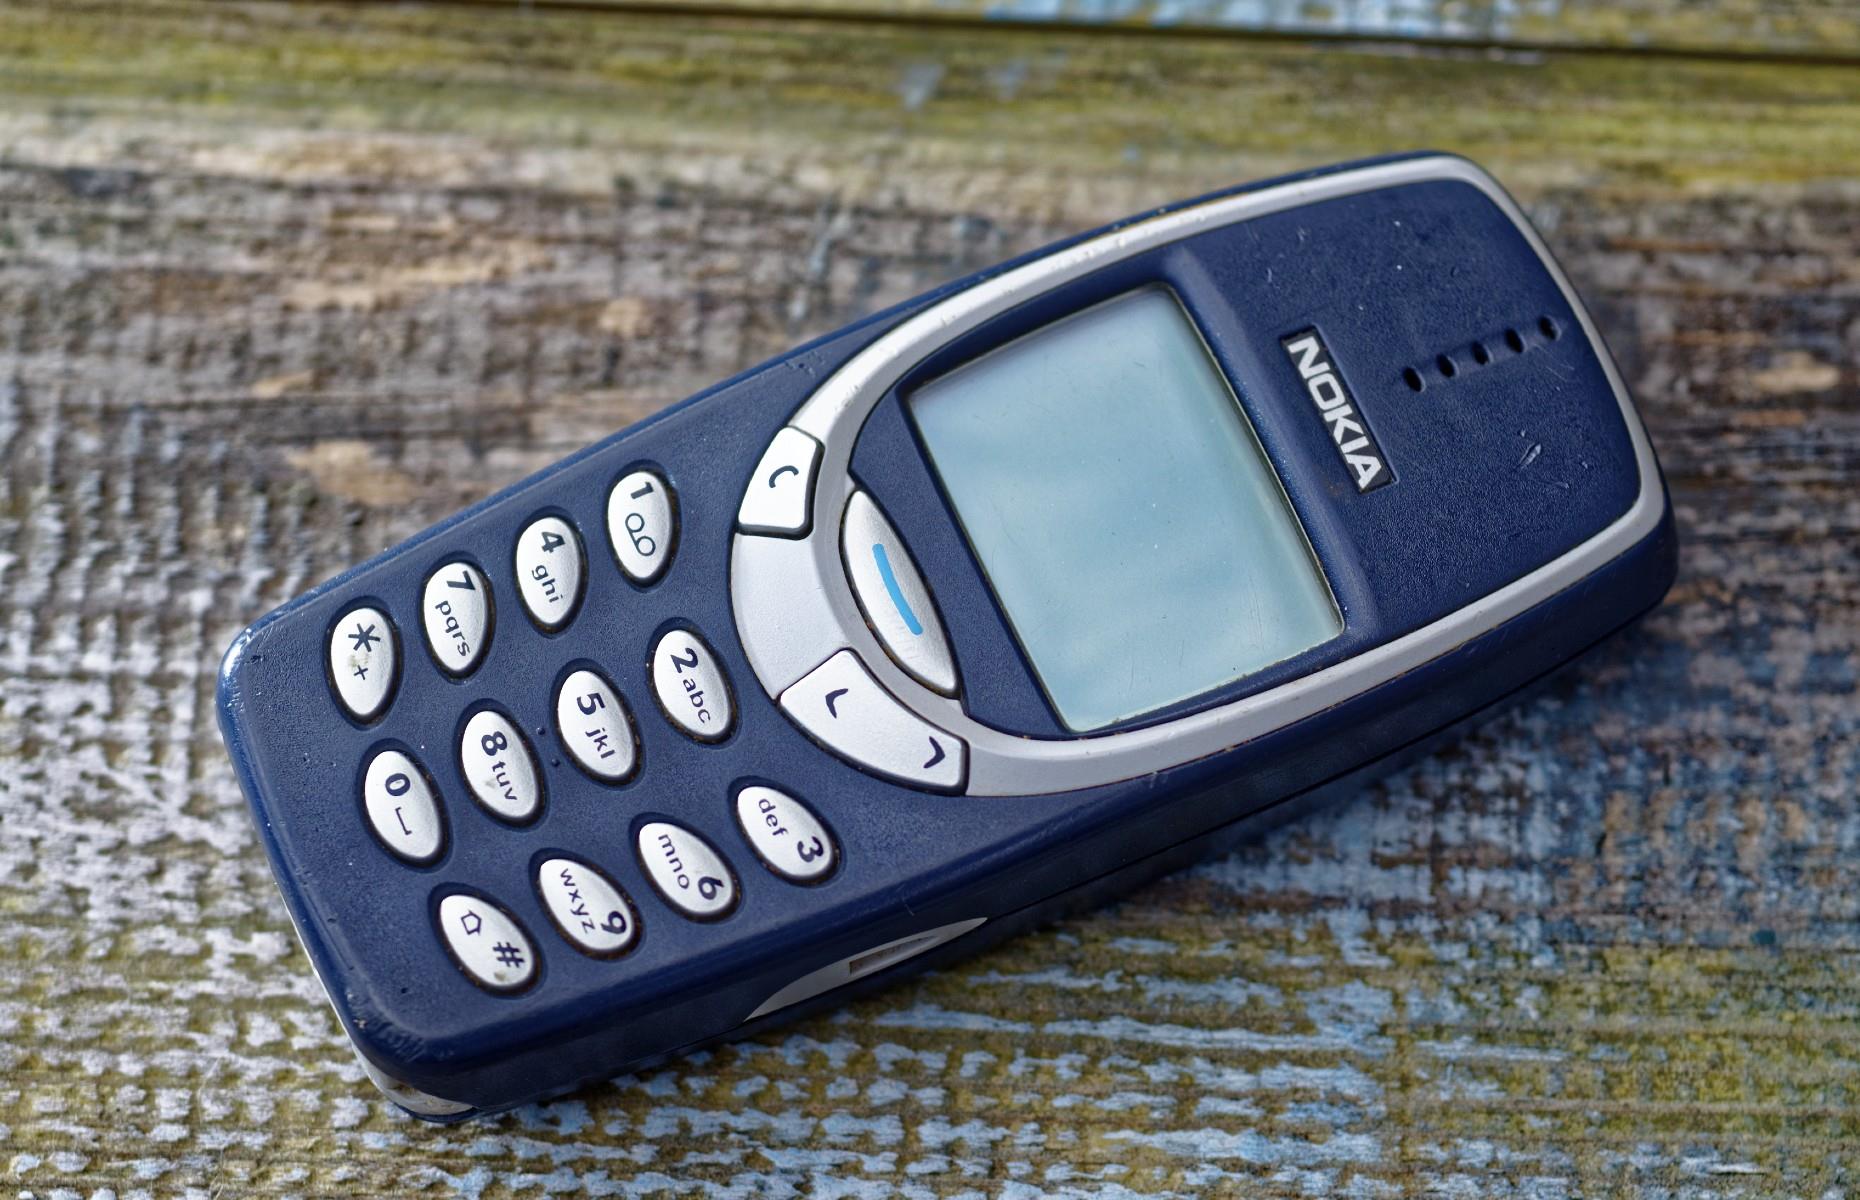 Mobile phones: became widely affordable in 1999